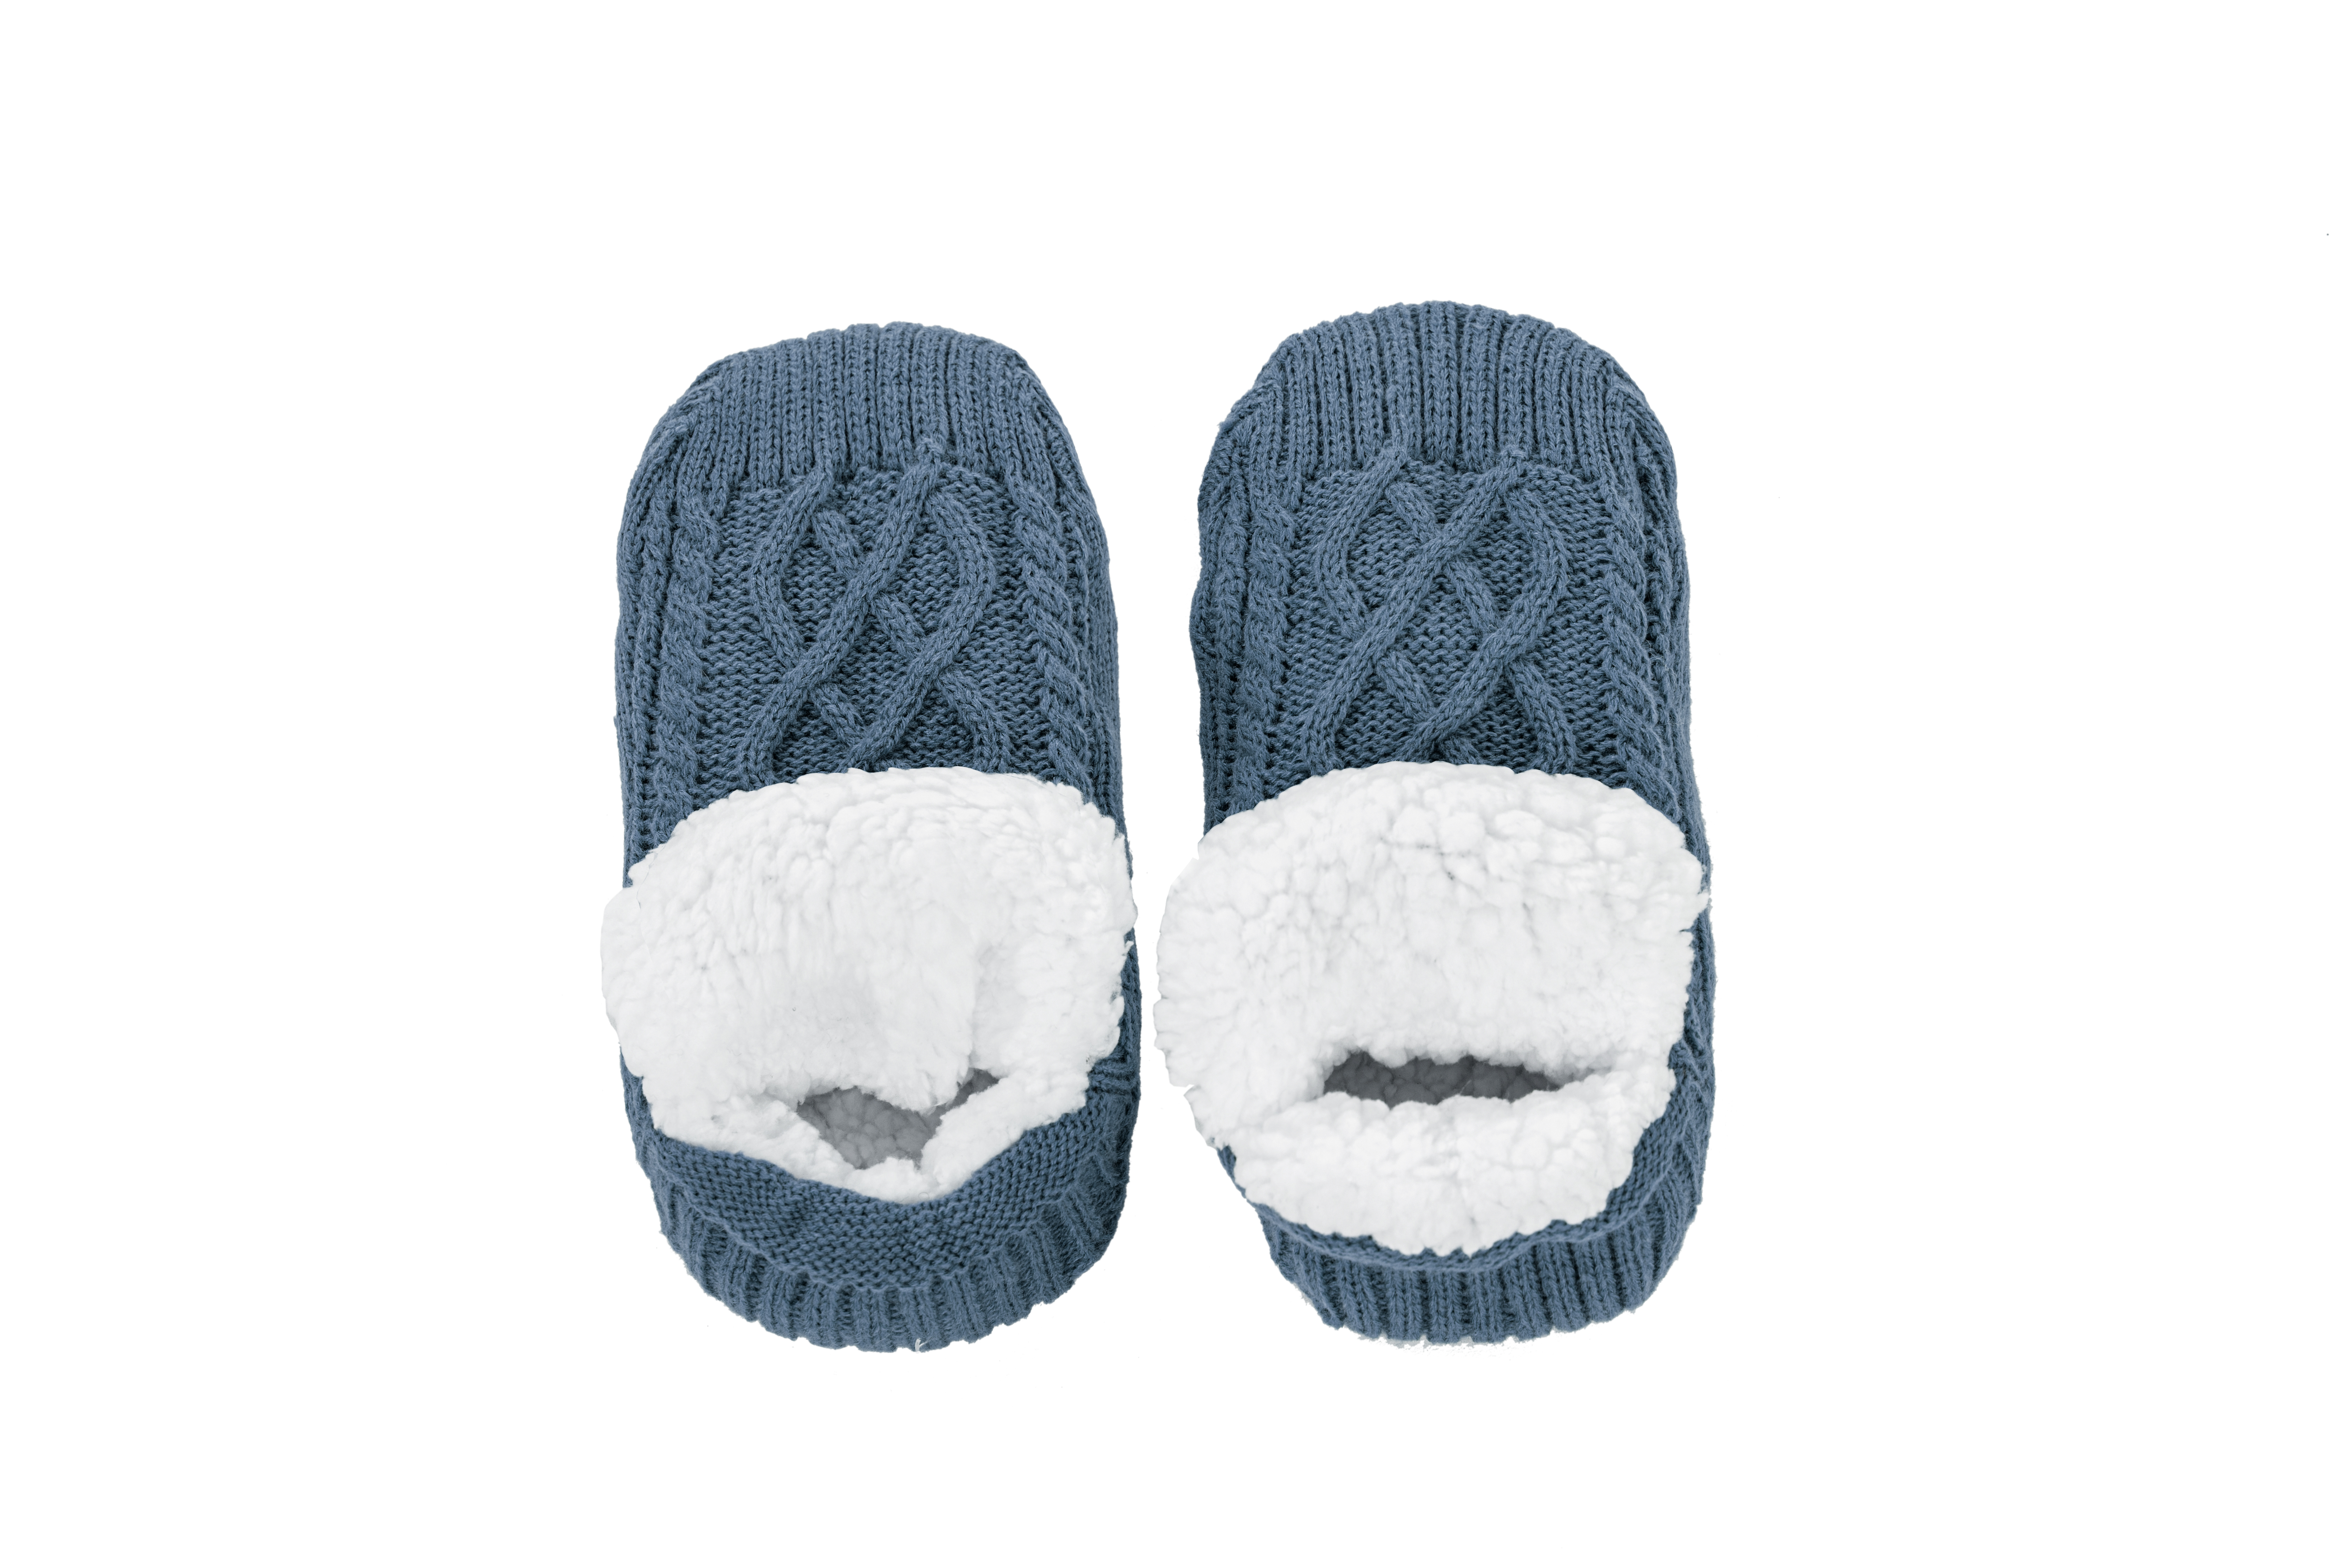 Socks (knitted) COSY, S/M (35-38) - L= 24cm, stone blue